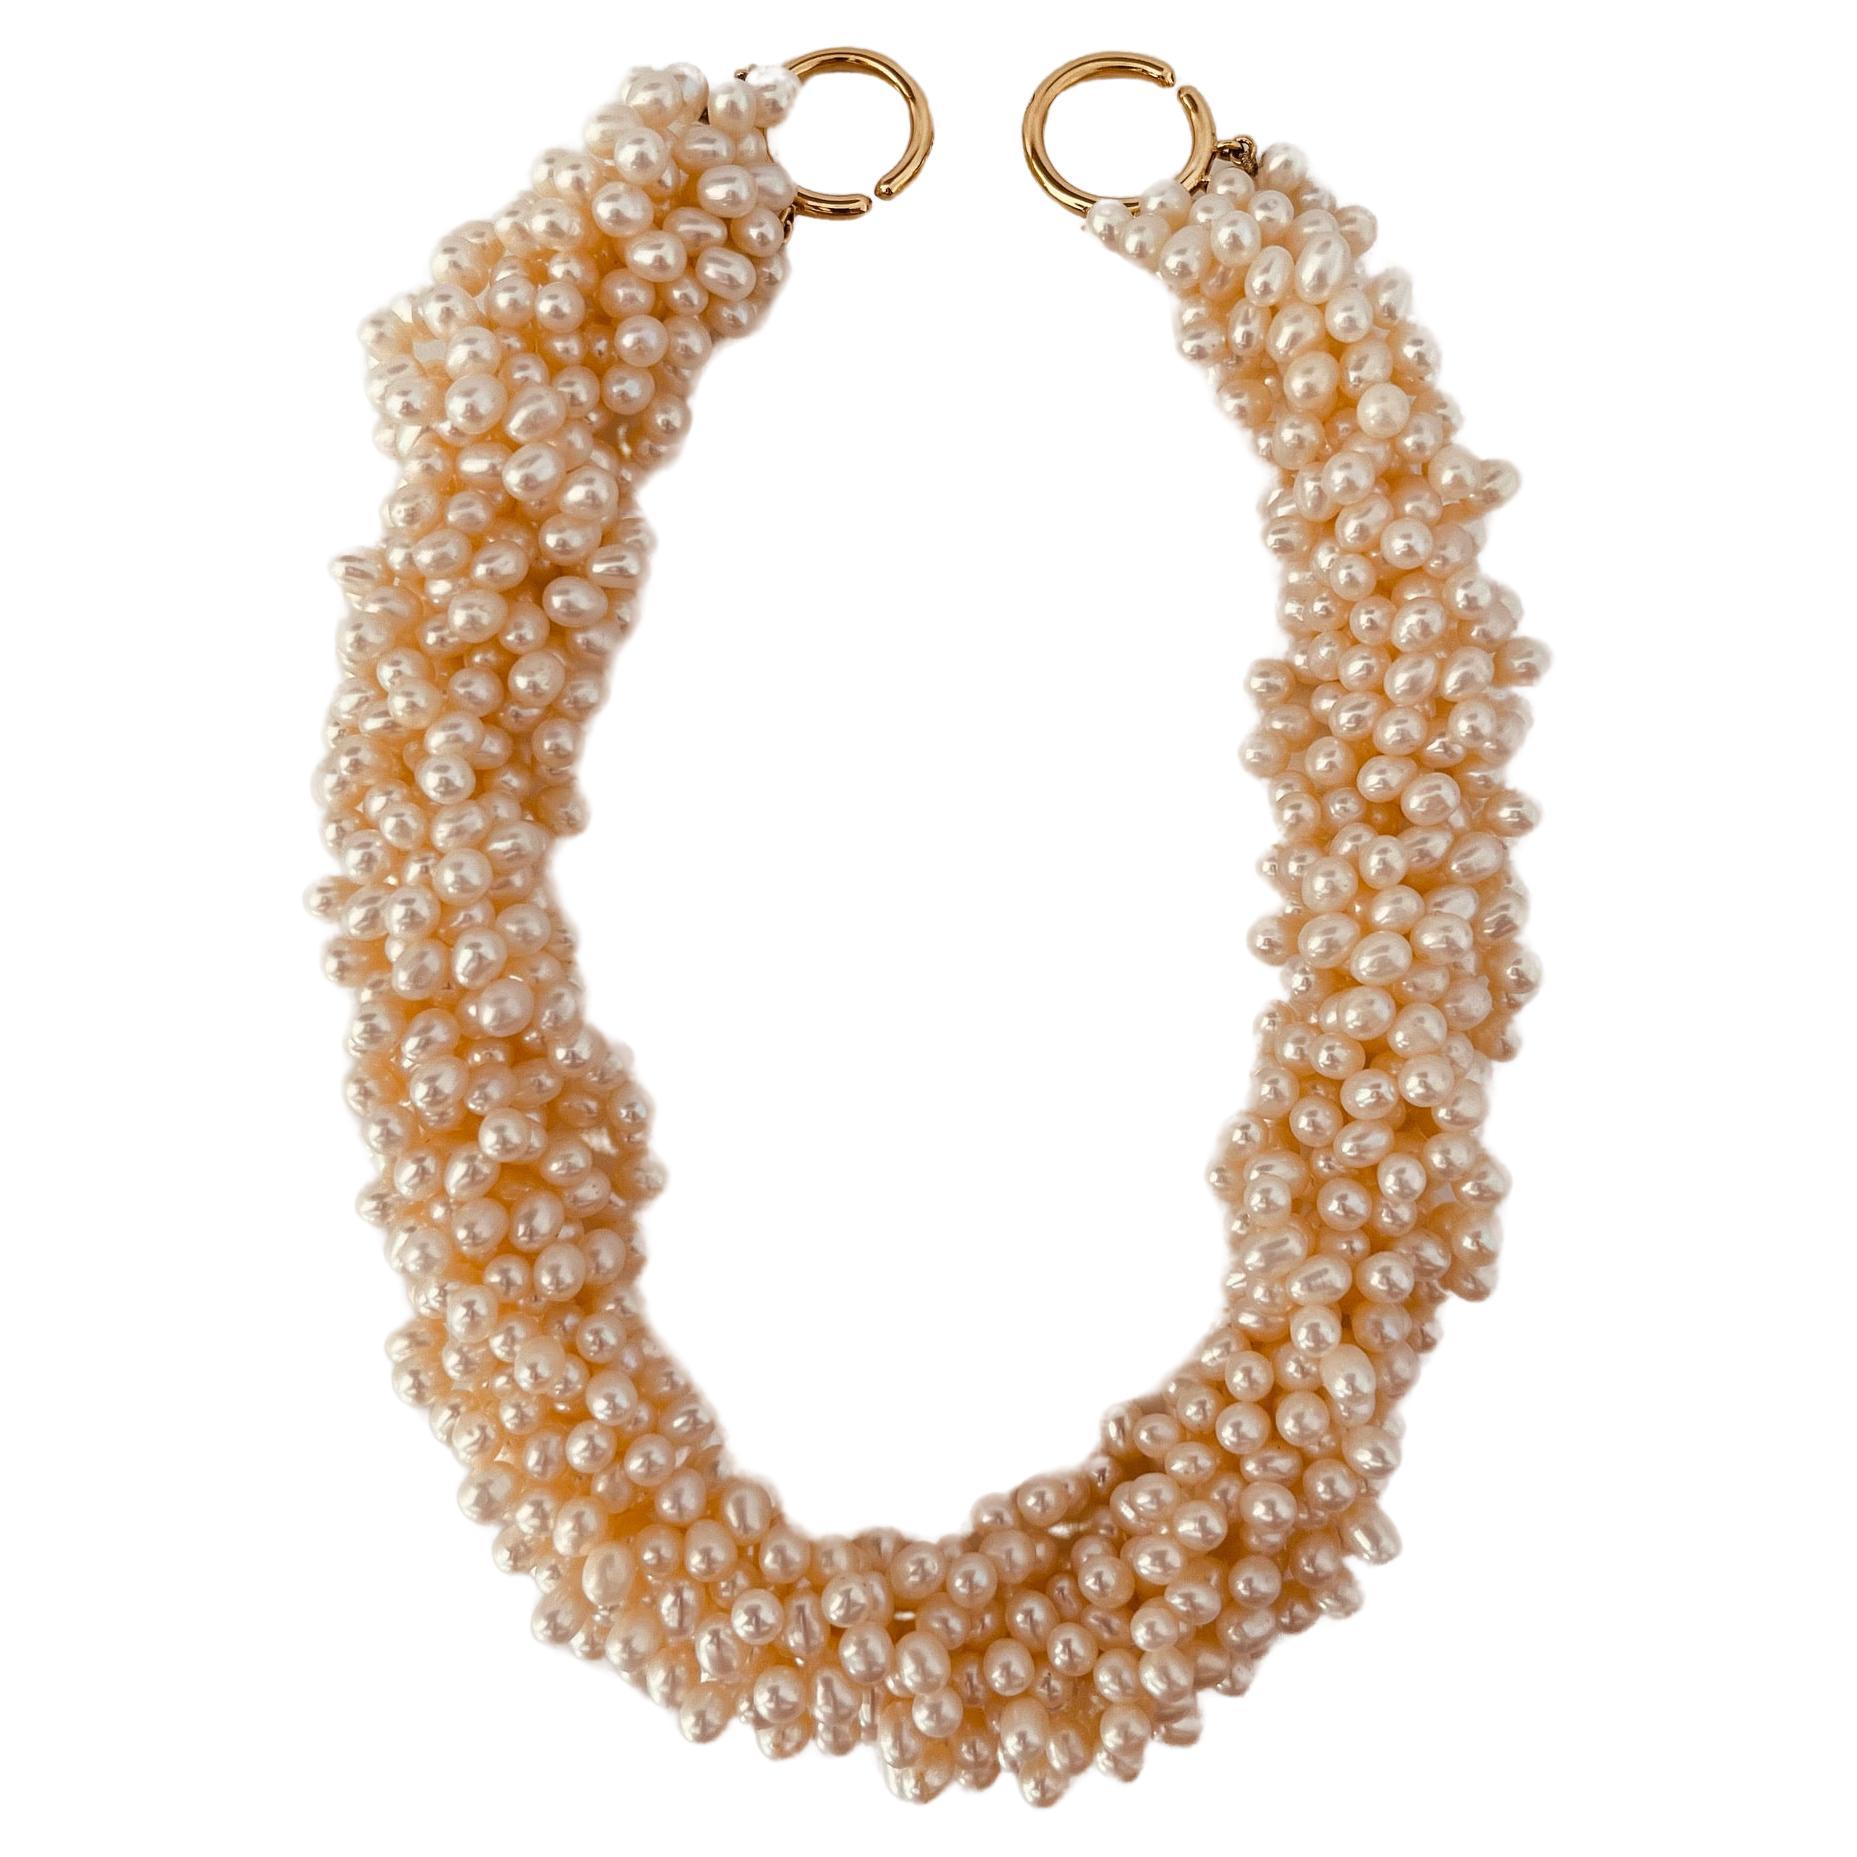 Eight-strand freshwater pearl necklace to 18ct gold interlocking hoops. 46cm length. Weight: 203.2 grams. Signed Tiffany 750 and Paloma Picasso. Black leather envelope maker's case. Circa 1990s. Price: 2,970£. Item is in very good condition without